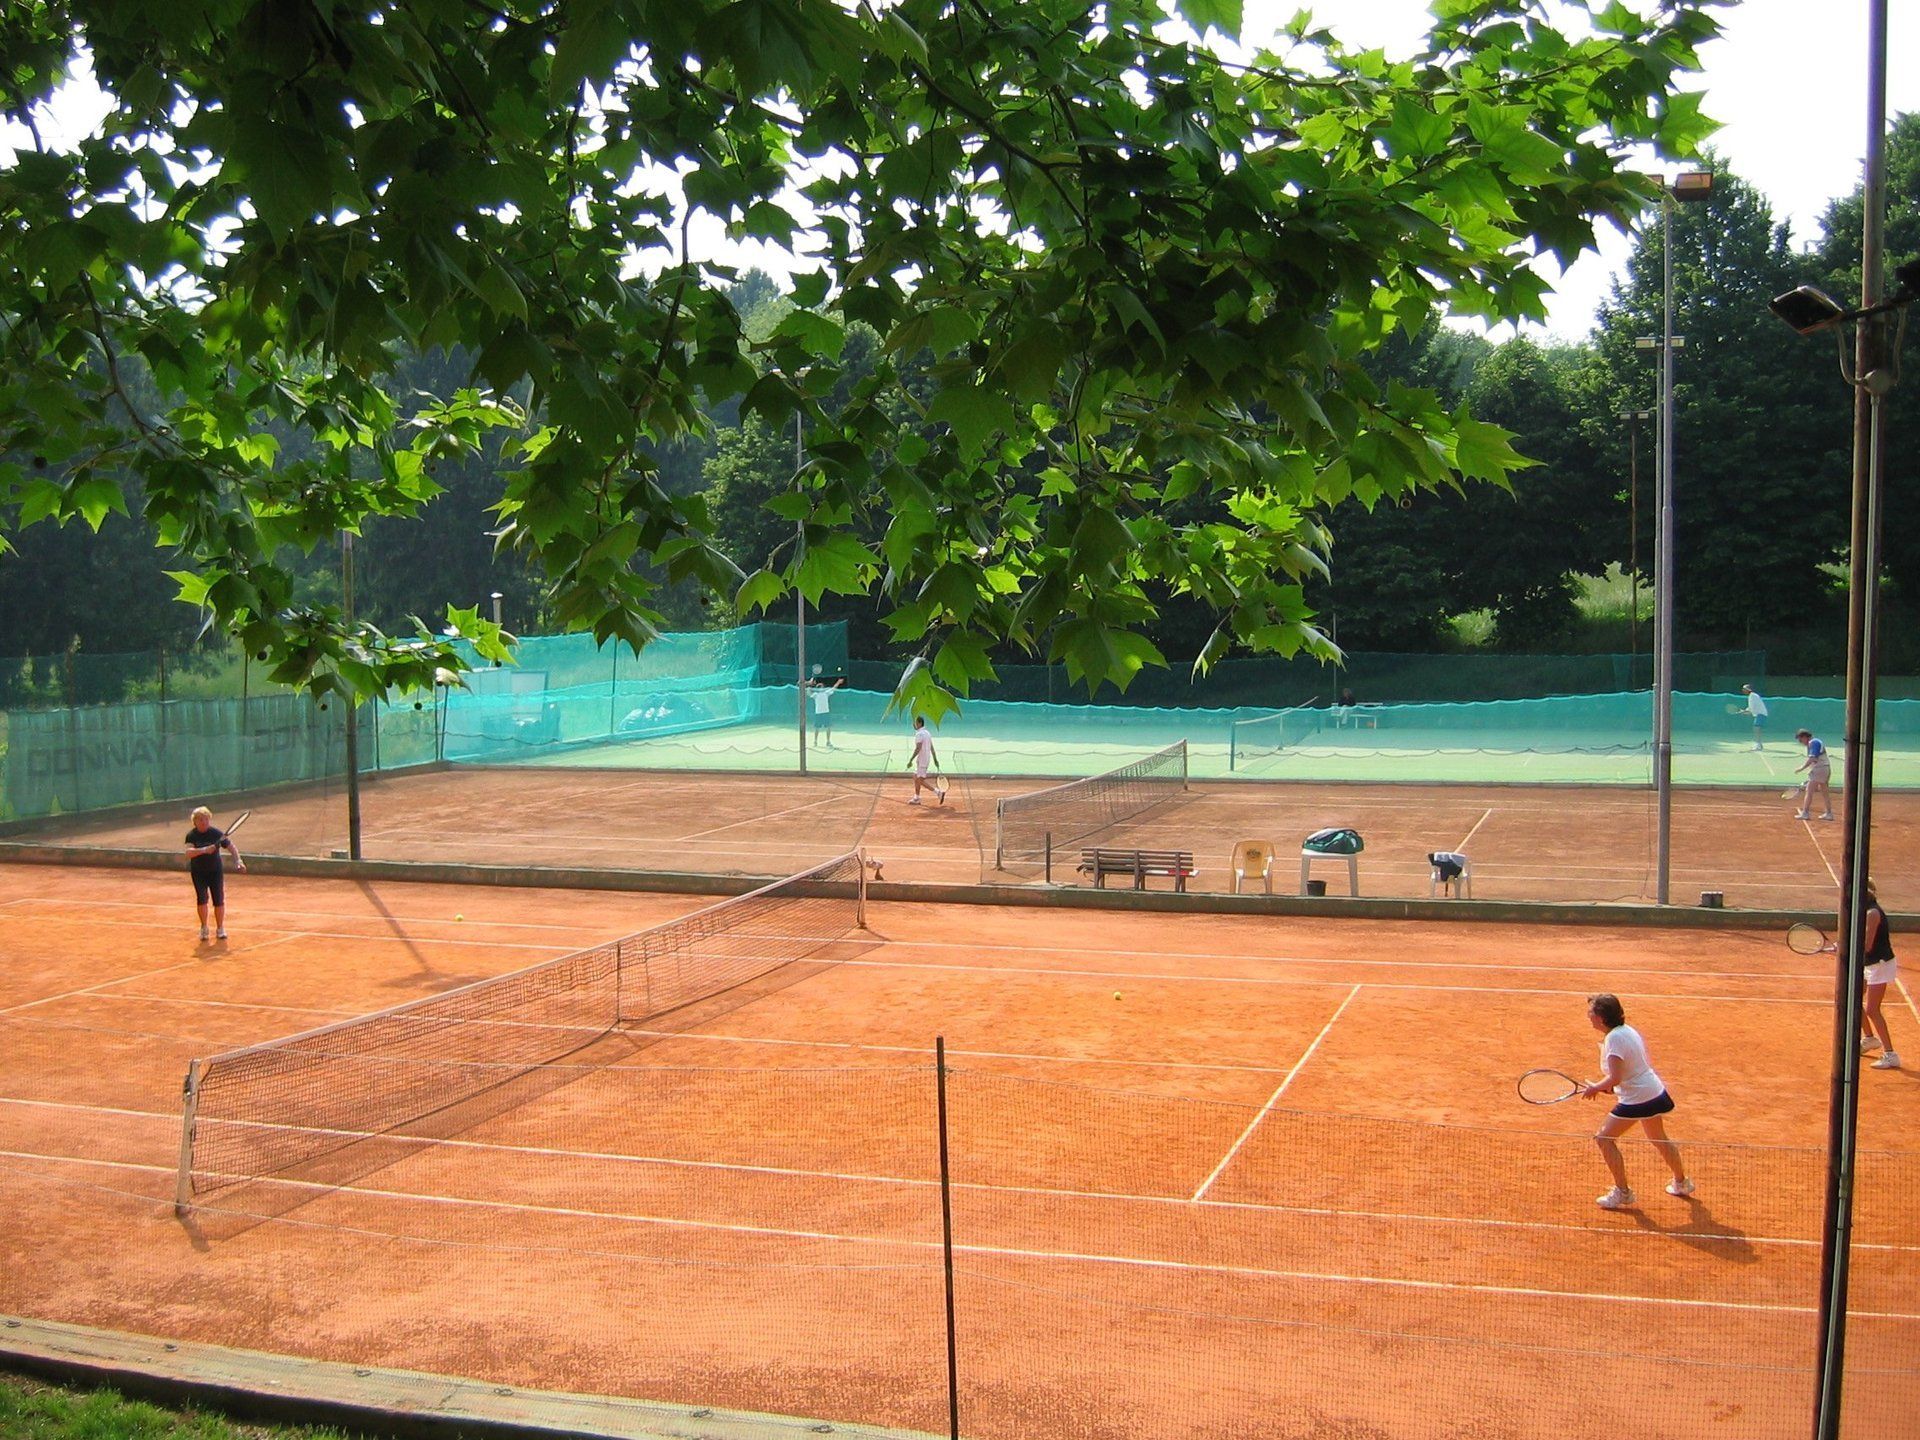 view from above of a tennis court with people playing